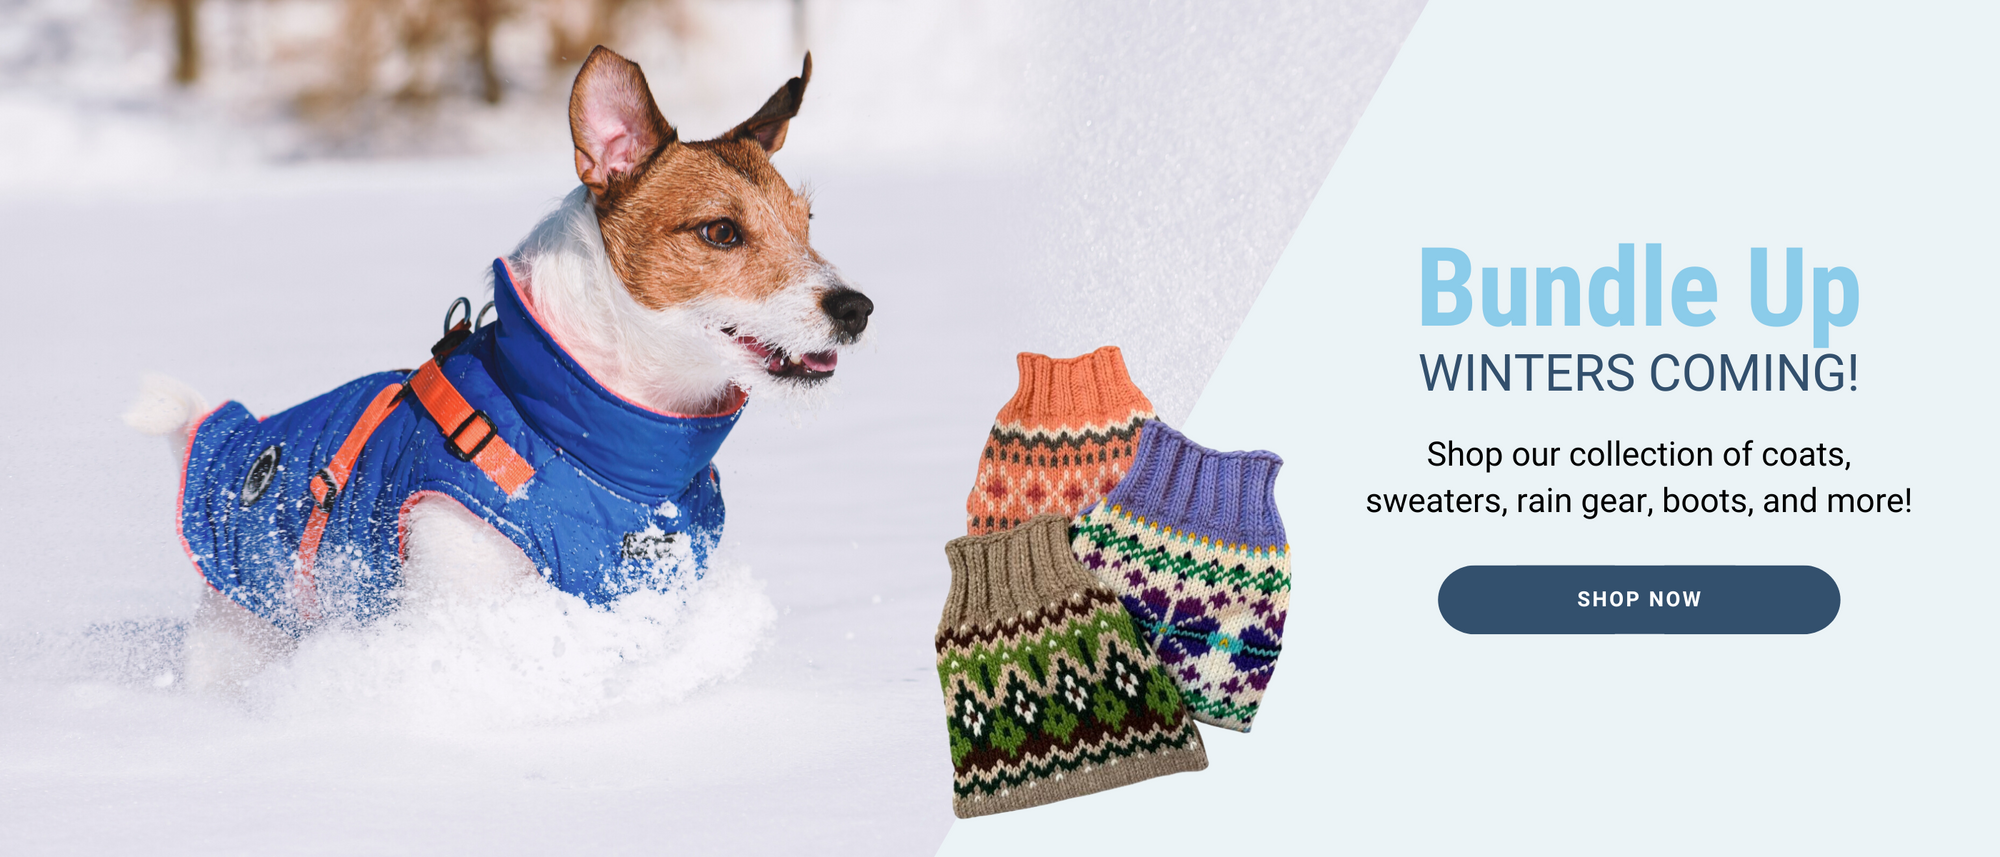 Bundle Up, Winters Coming! Shop outerwear for your pets to keep them warm this winter!